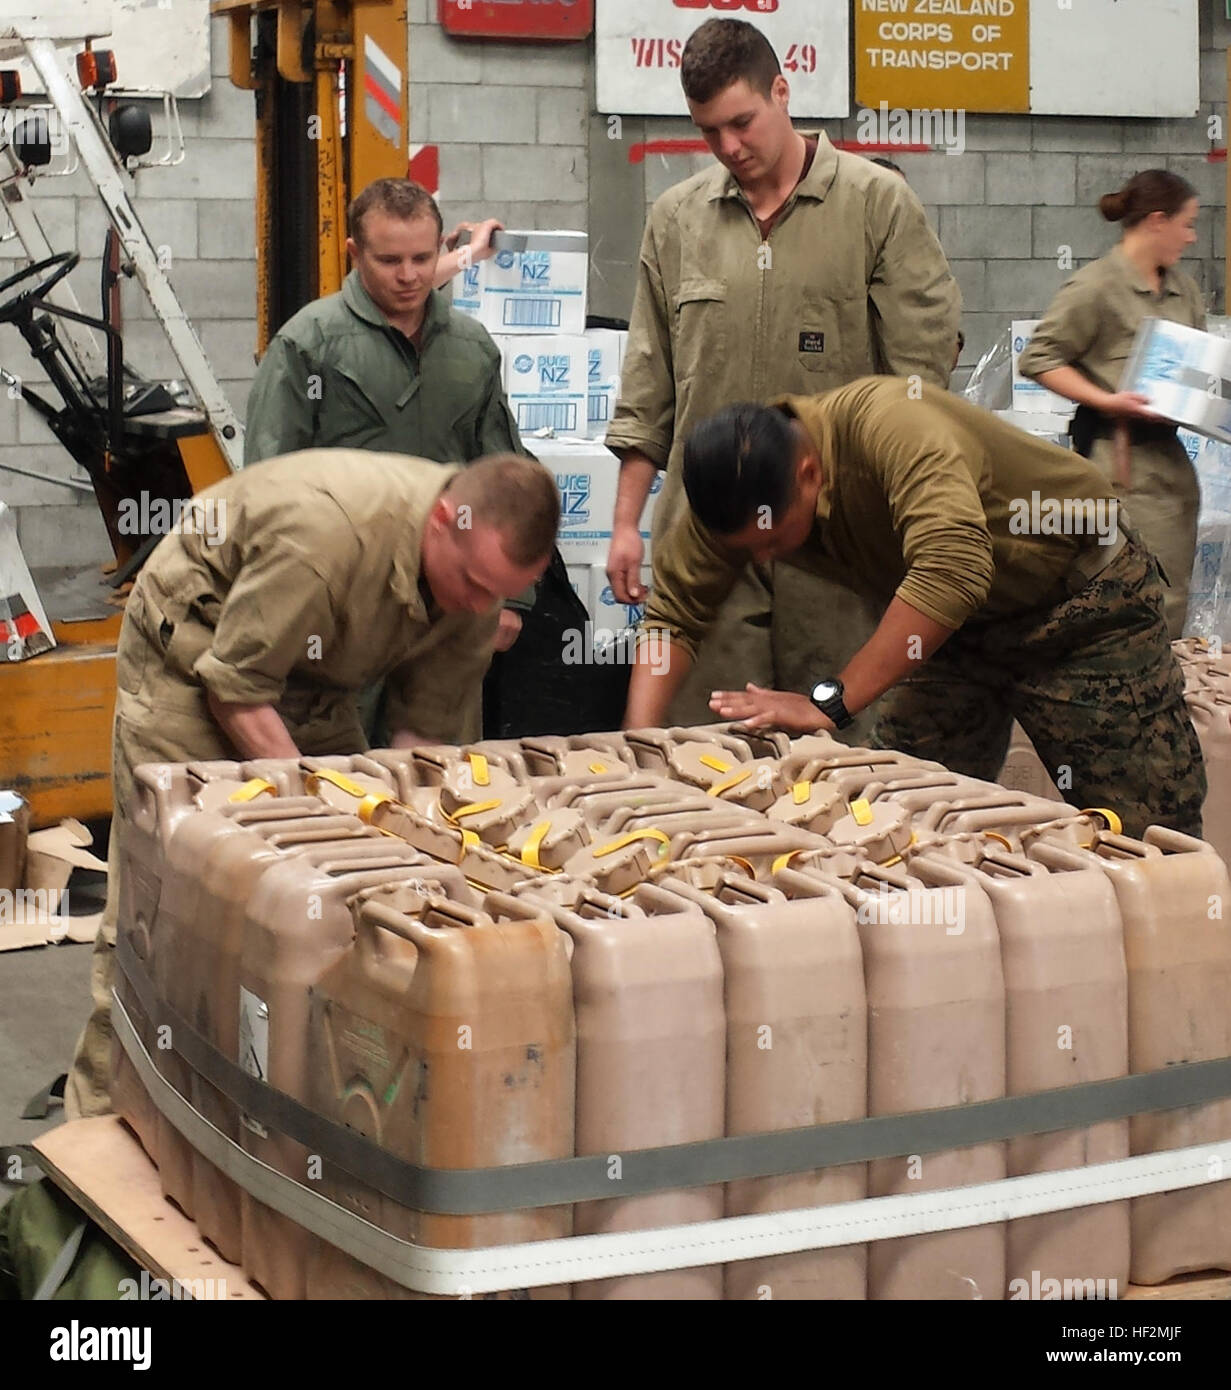 U.S. Marines with 1st Transportation Support Battalion, Combat Logistics Regiment 1, and New Zealand Defense Force soldiers with Air Delivery Platoon, 5th Movement Co., prepare 5-gallon jugs of water for an air drop  from a C-130 'Hercules' aircraft during Exercise Kiwi Koru 2014  on Nov. 5, 2014. Kiwi Koru is an interopability exercise centered in the pacific which allows U.S. forces to interact and learn with their Kiwi counterparts. (Courtesy photo by Stephen Sheppard/ Released) Marines, New Zealand Soldiers conduct airdrops during Exercise Kiwi Koru 2014 141105-M-UK001-230 Stock Photo